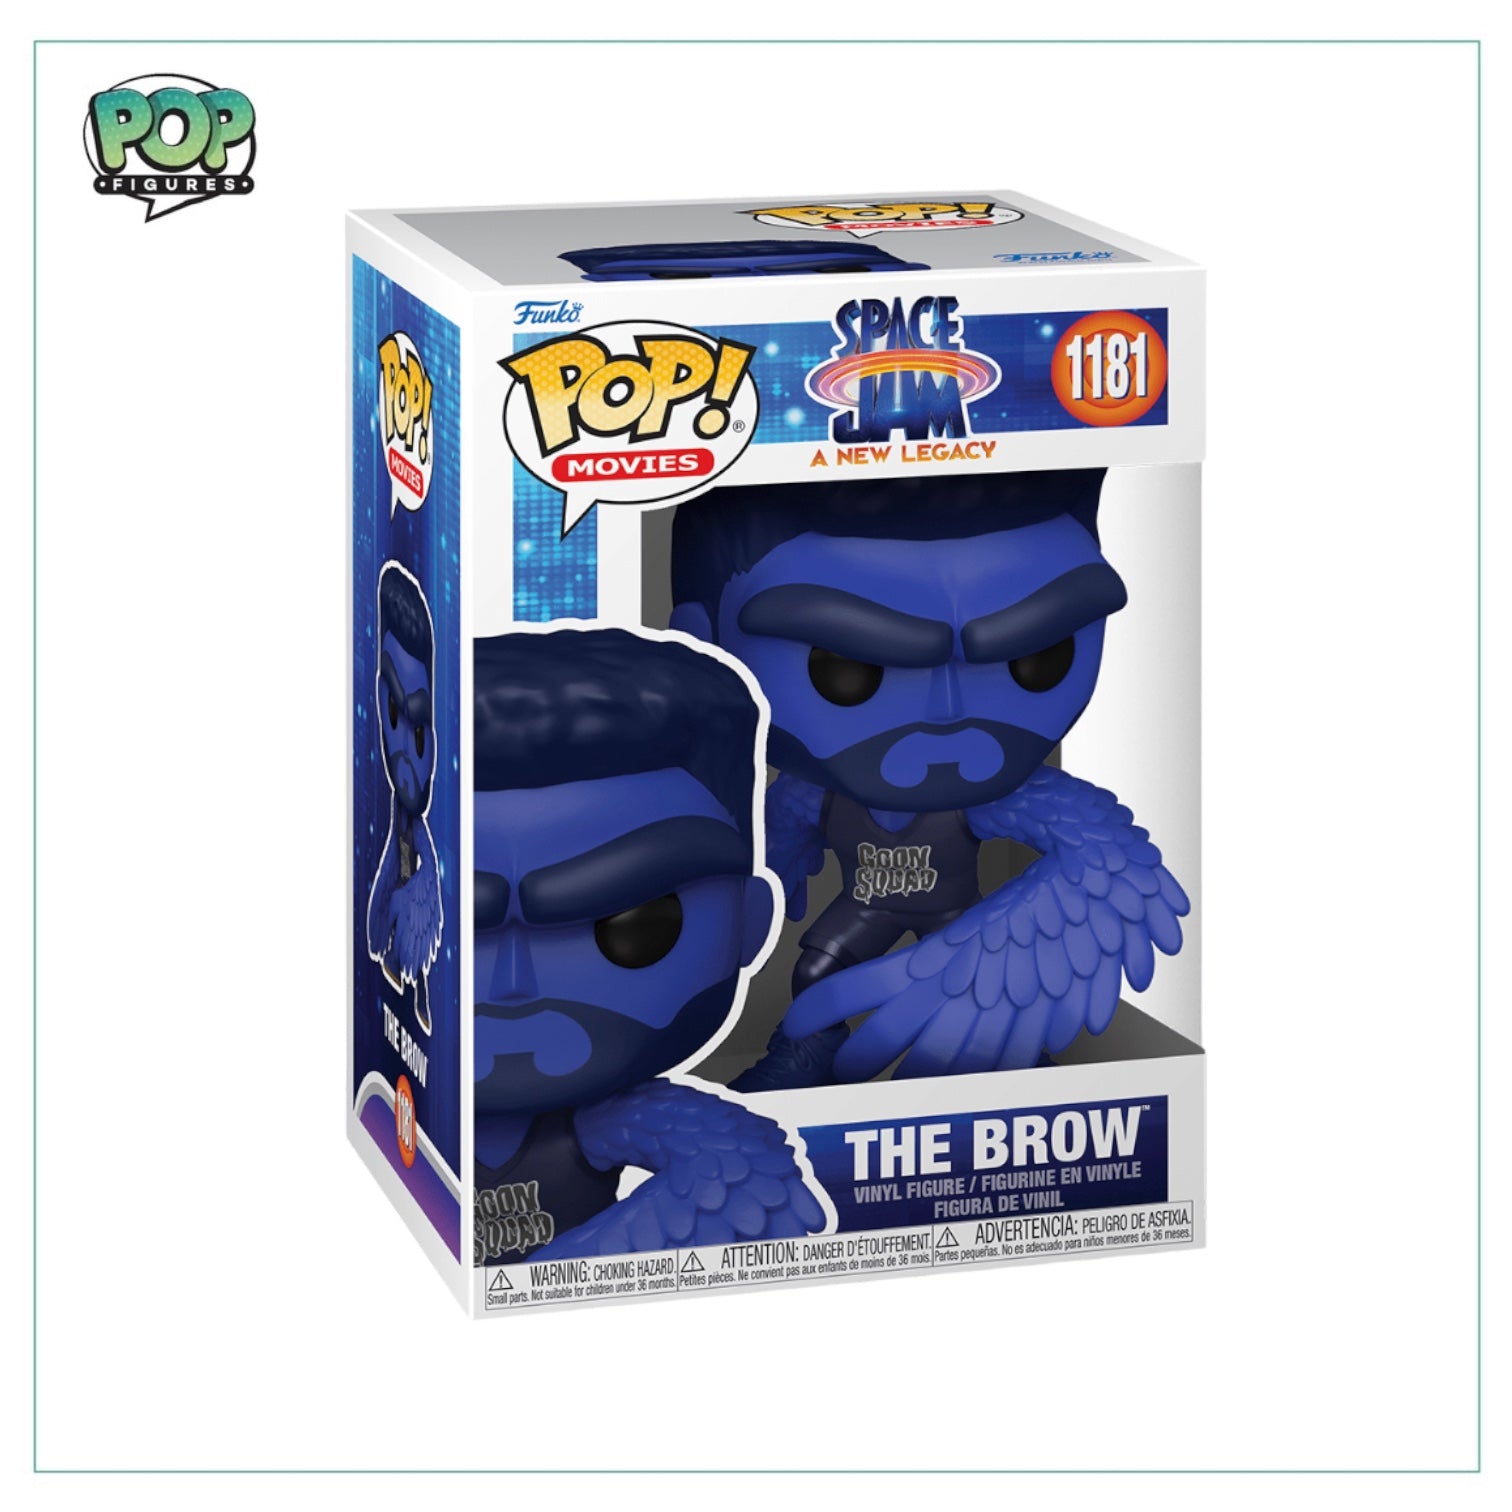 The Brow #1181 Funko Pop! Space Jam: A New Legacy